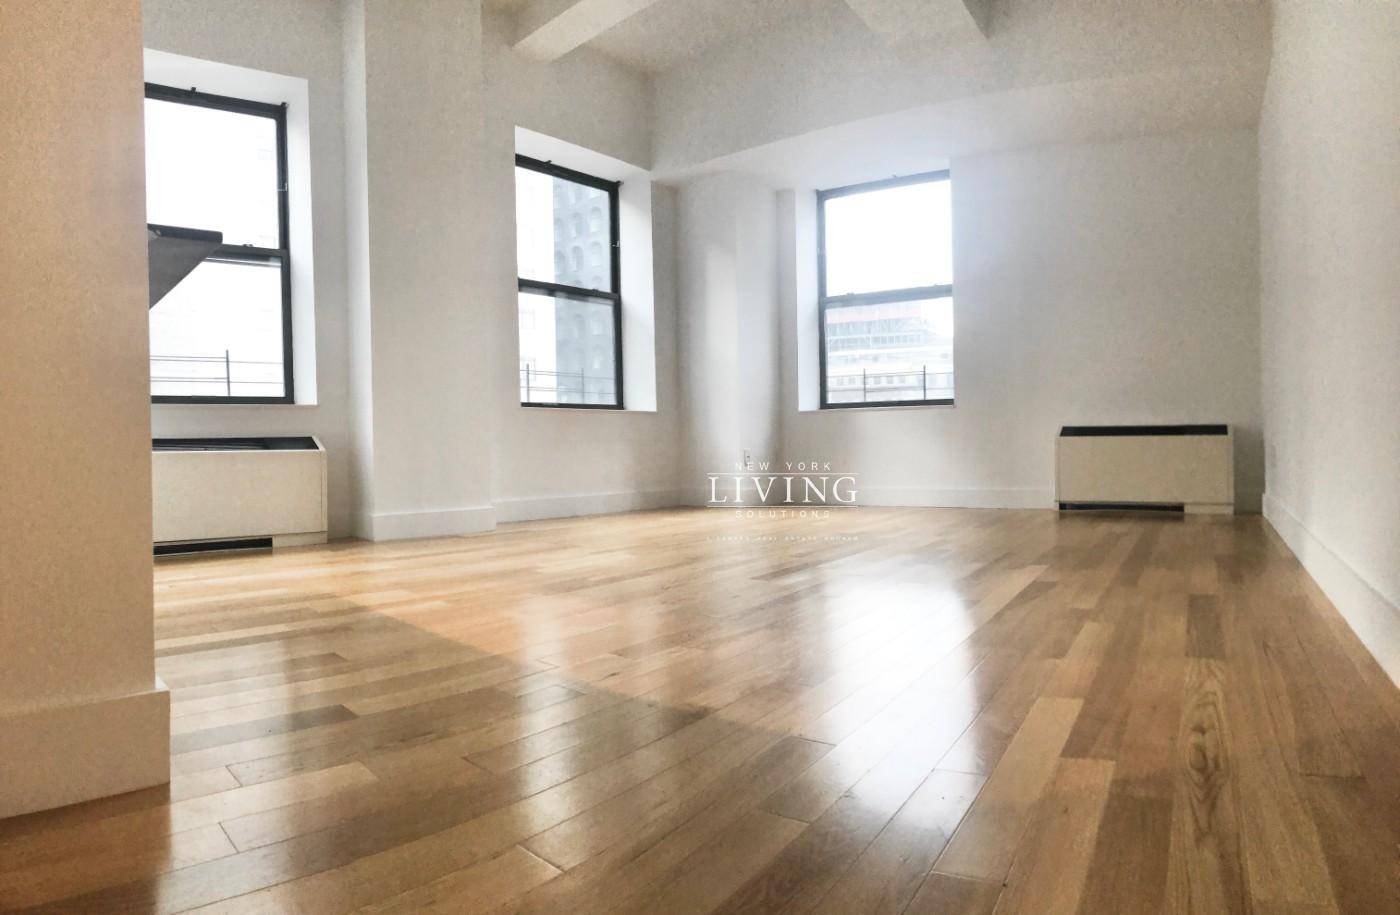 No Broker Fee. Stunning True 2 bedroom 2 full bath luxury loft apartment located on a high floor with north and western exposure.